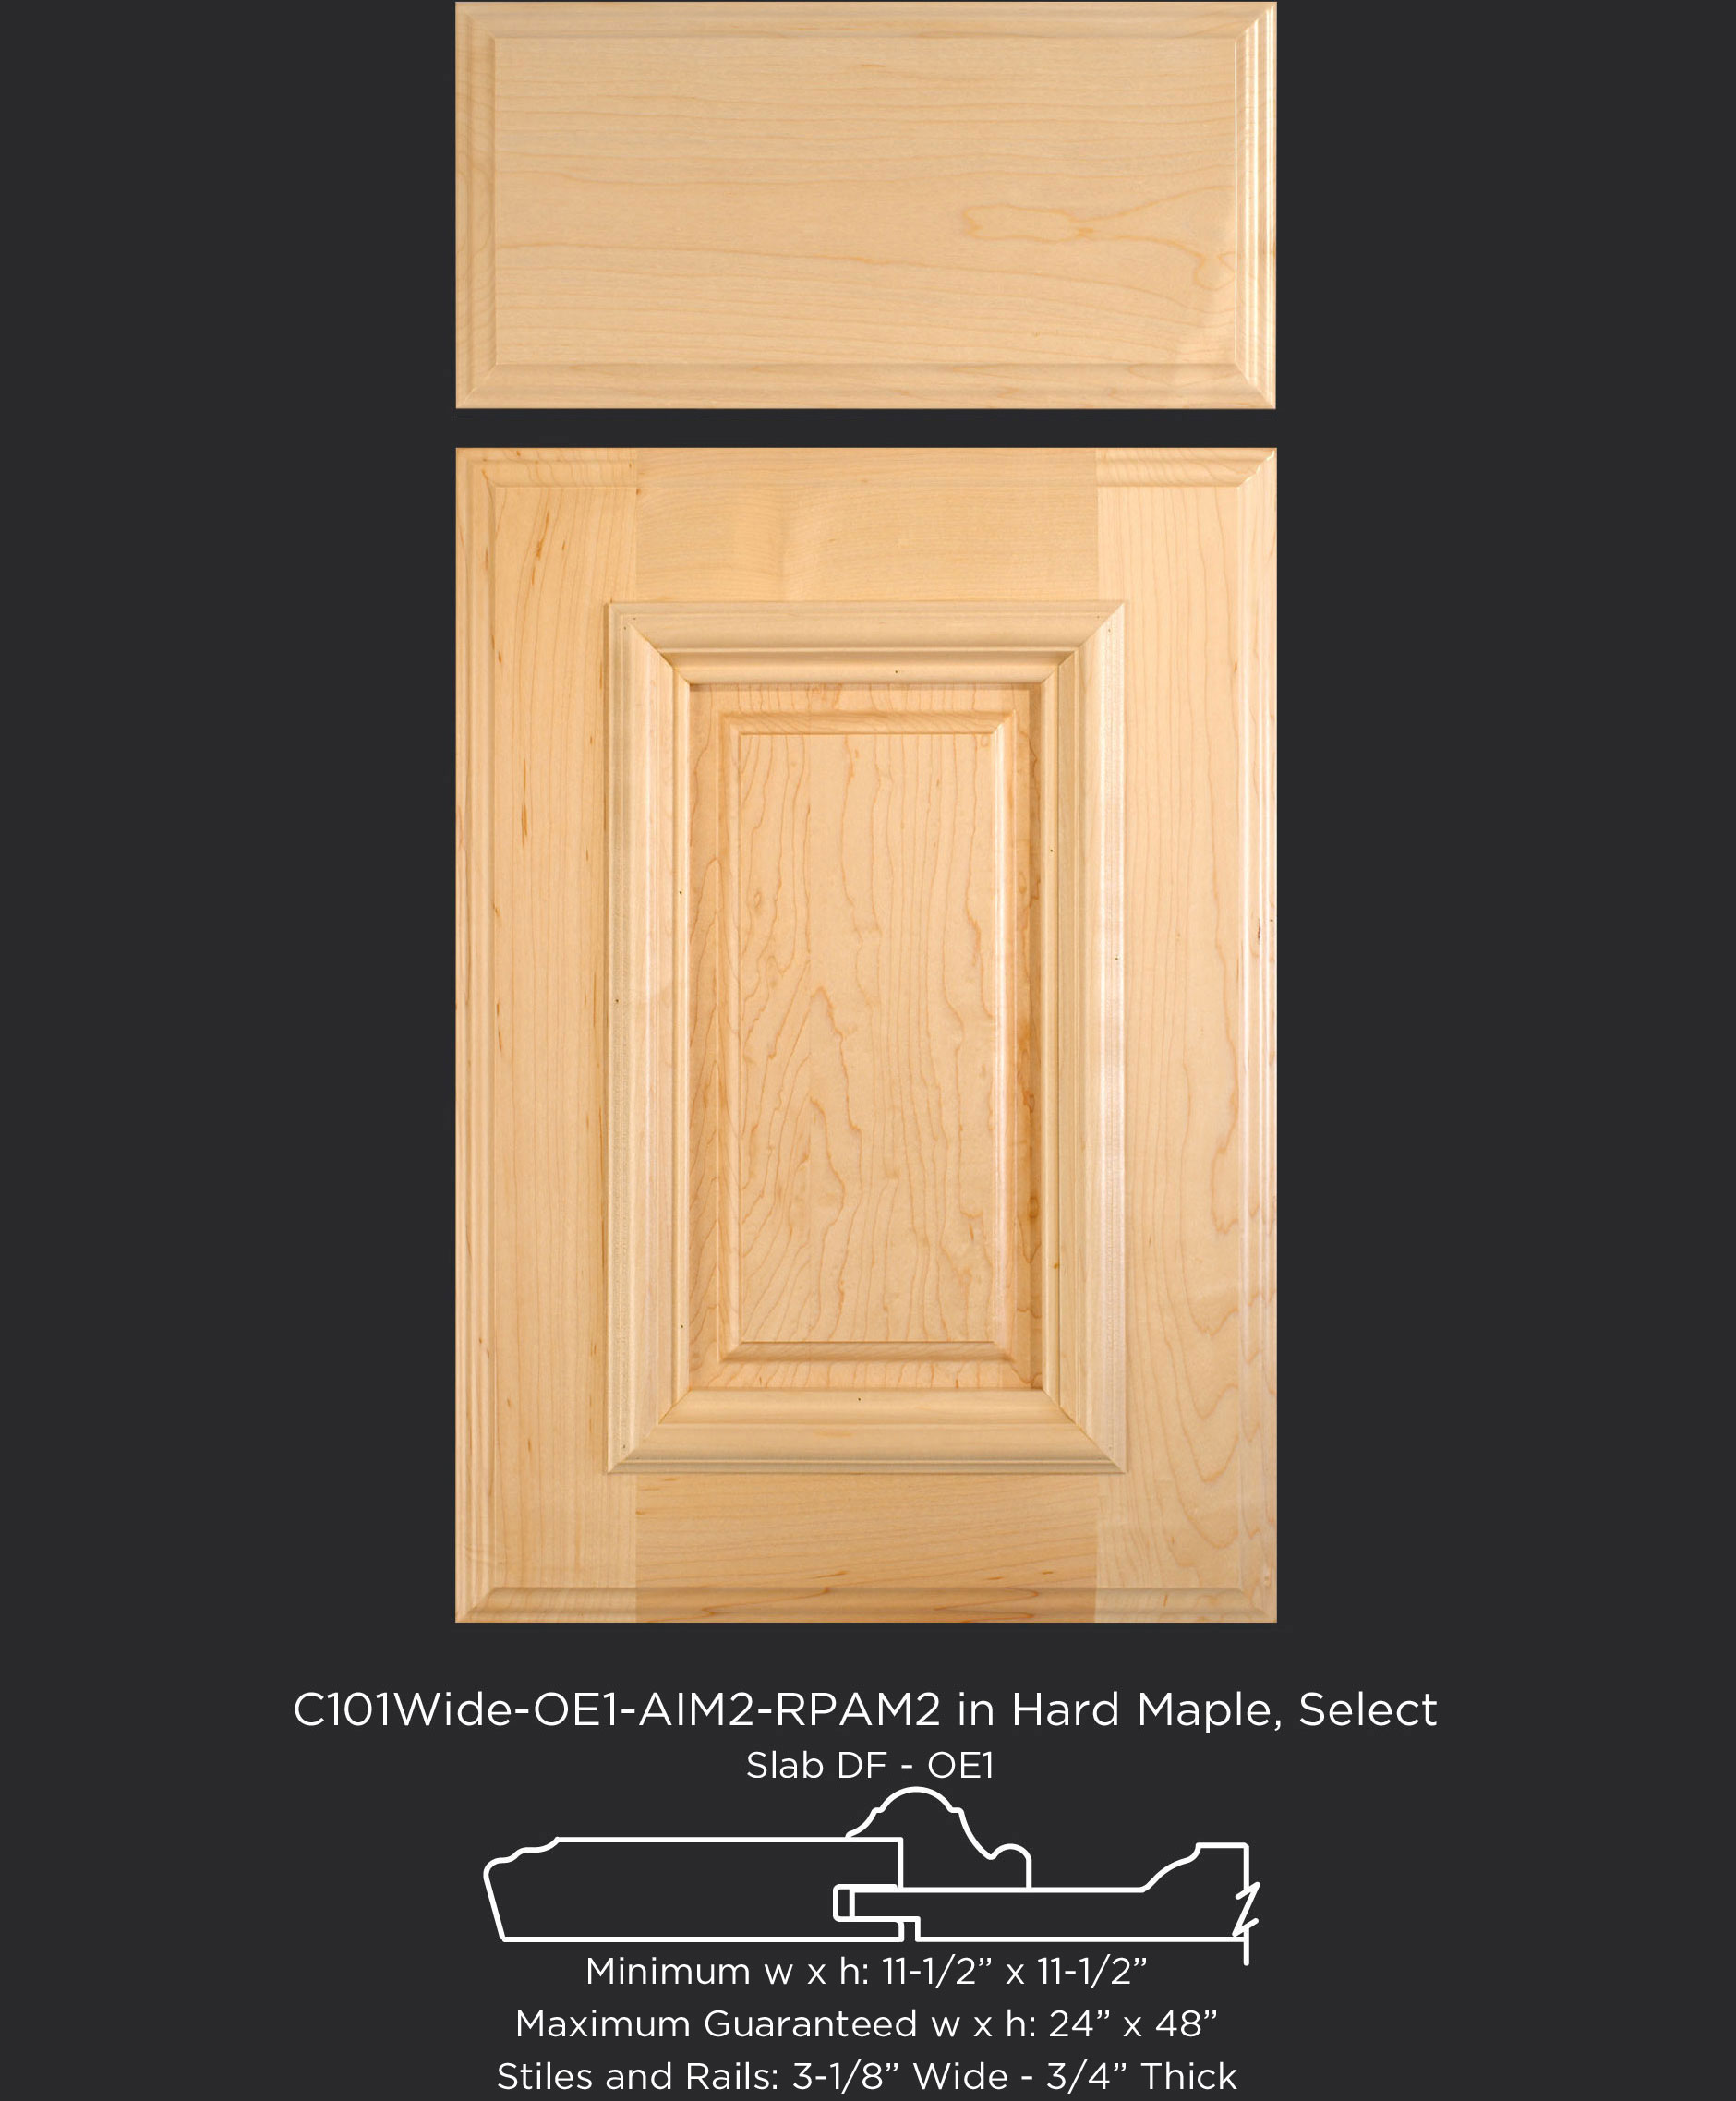 Cope and Stick Cabinet Door C101 Wide OE1-AIM2-RPAM2 in Hard Maple, Select - Slab drawer front with OE1